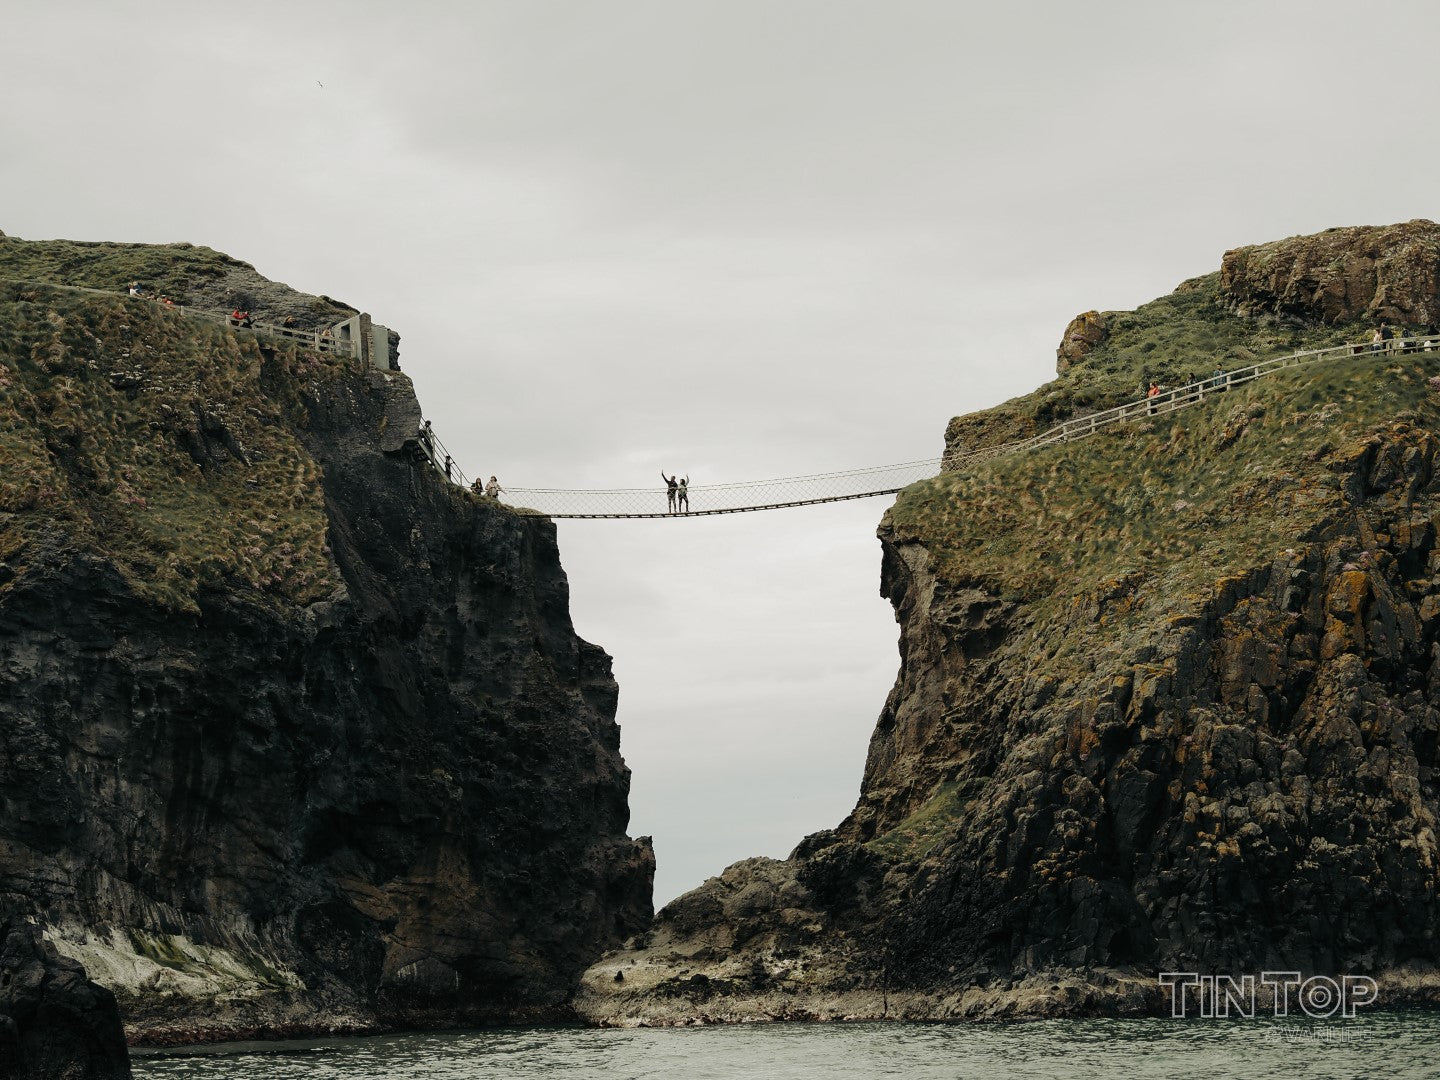 Carrick-a-Rede Rope Bridge from the sea